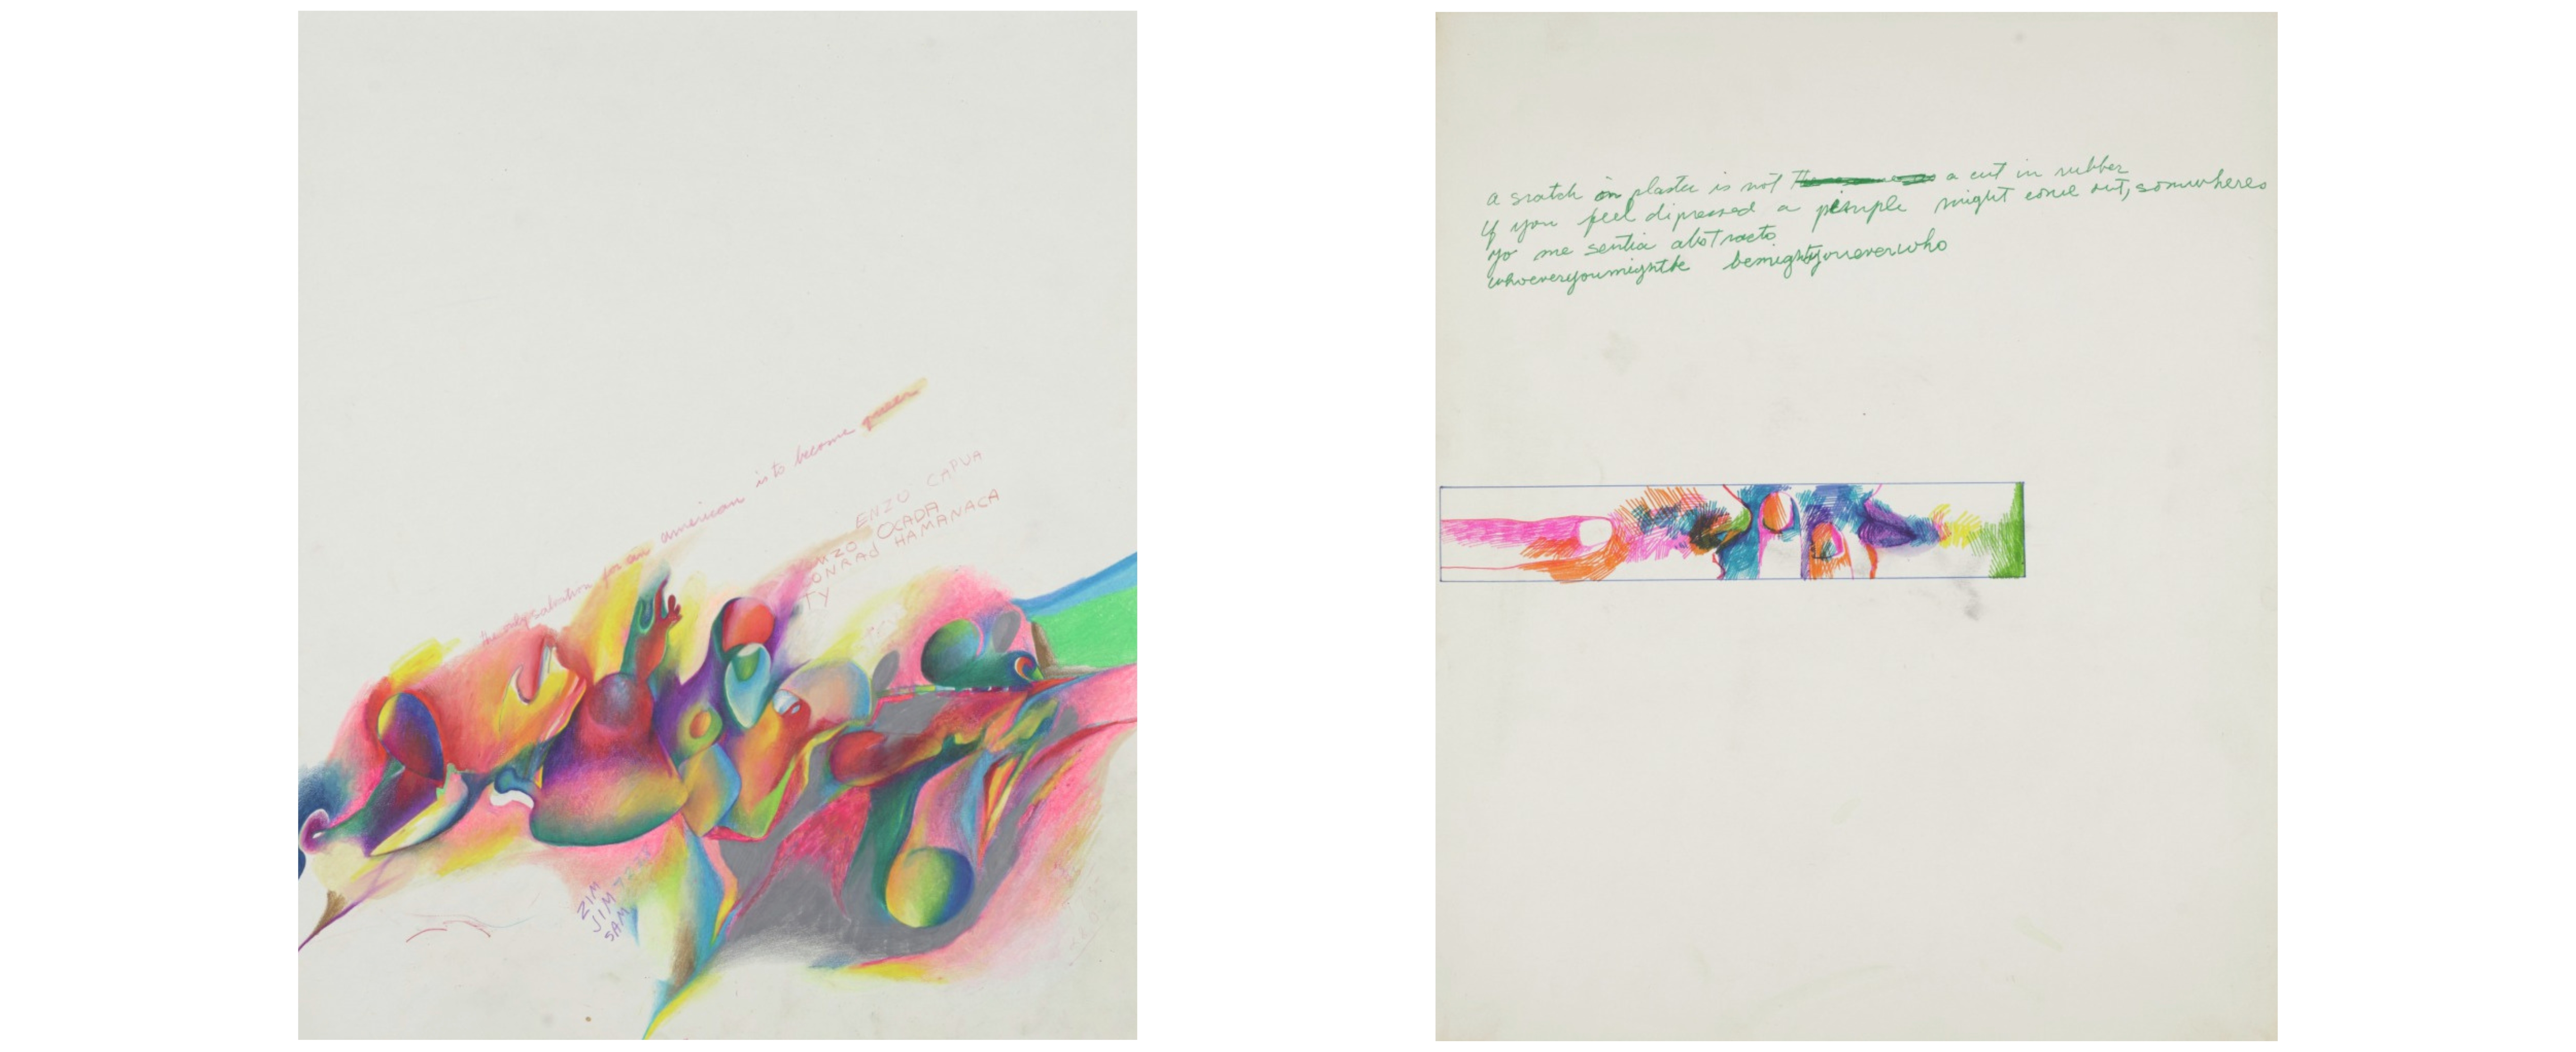 Two colorful sketches by Marisol, the left resembling fire and the right has cursive green text and a small rectangle featuring two profiles/mouths and noses